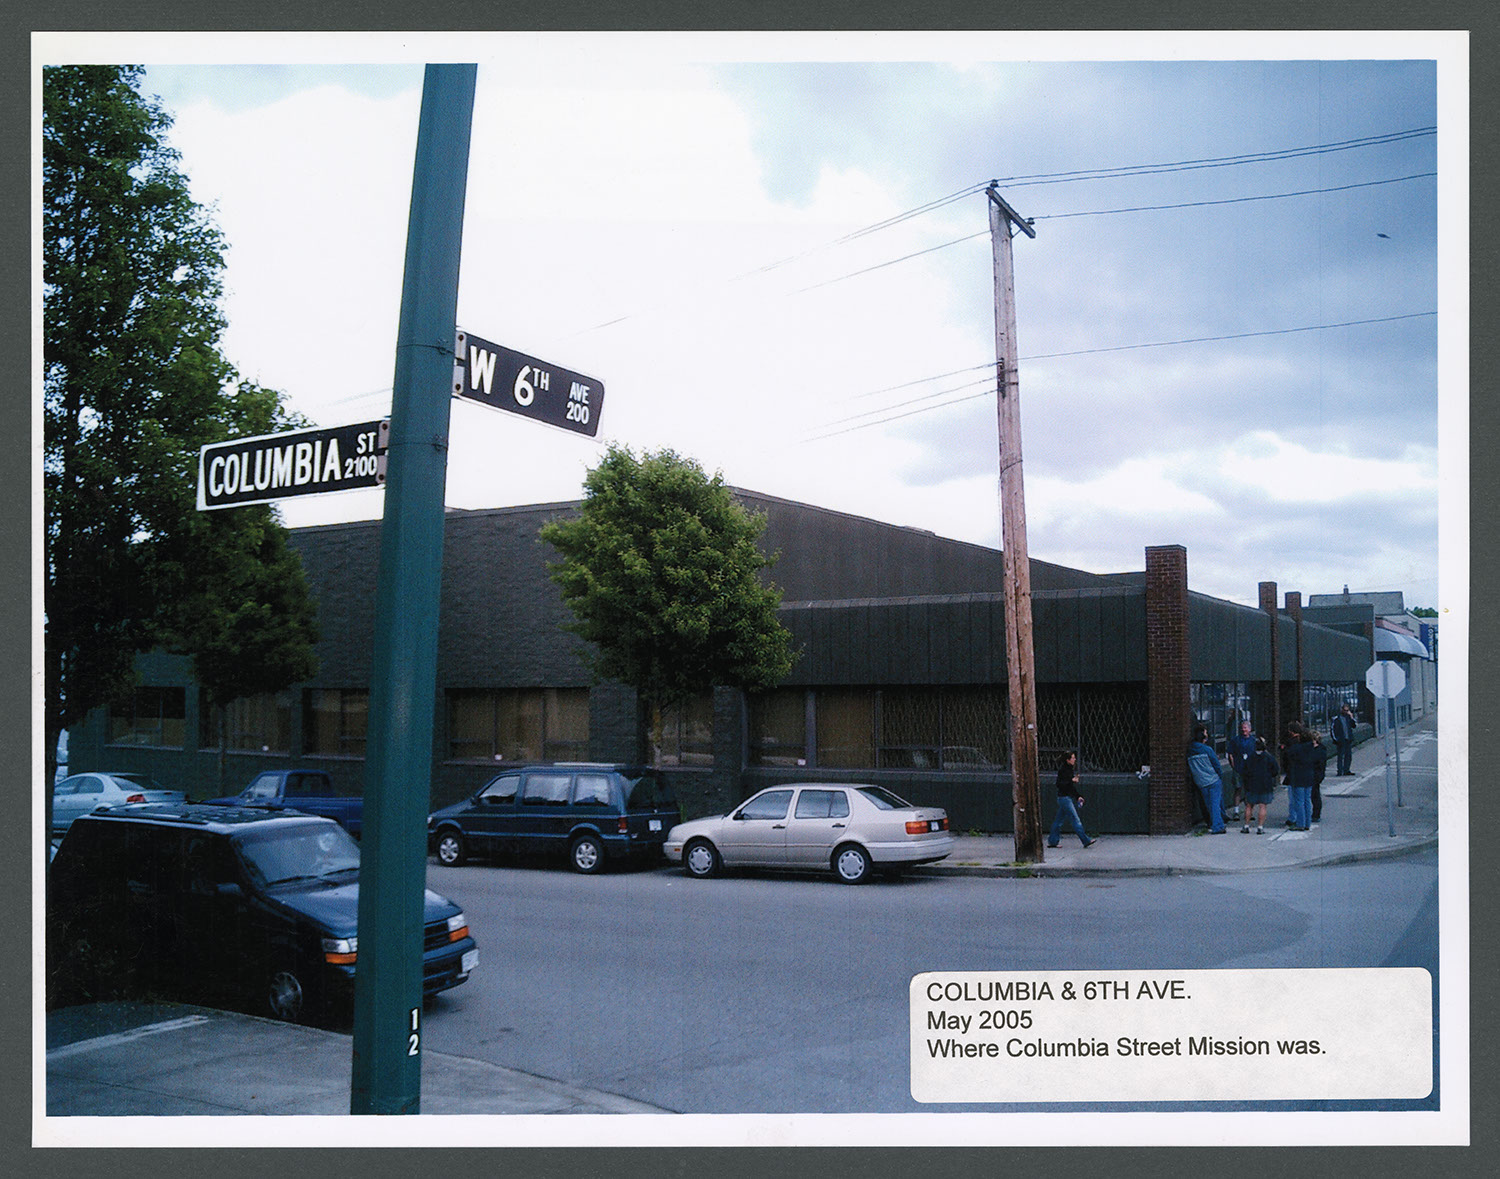 Columbia & 6th Ave., where Columbia Street Mission was